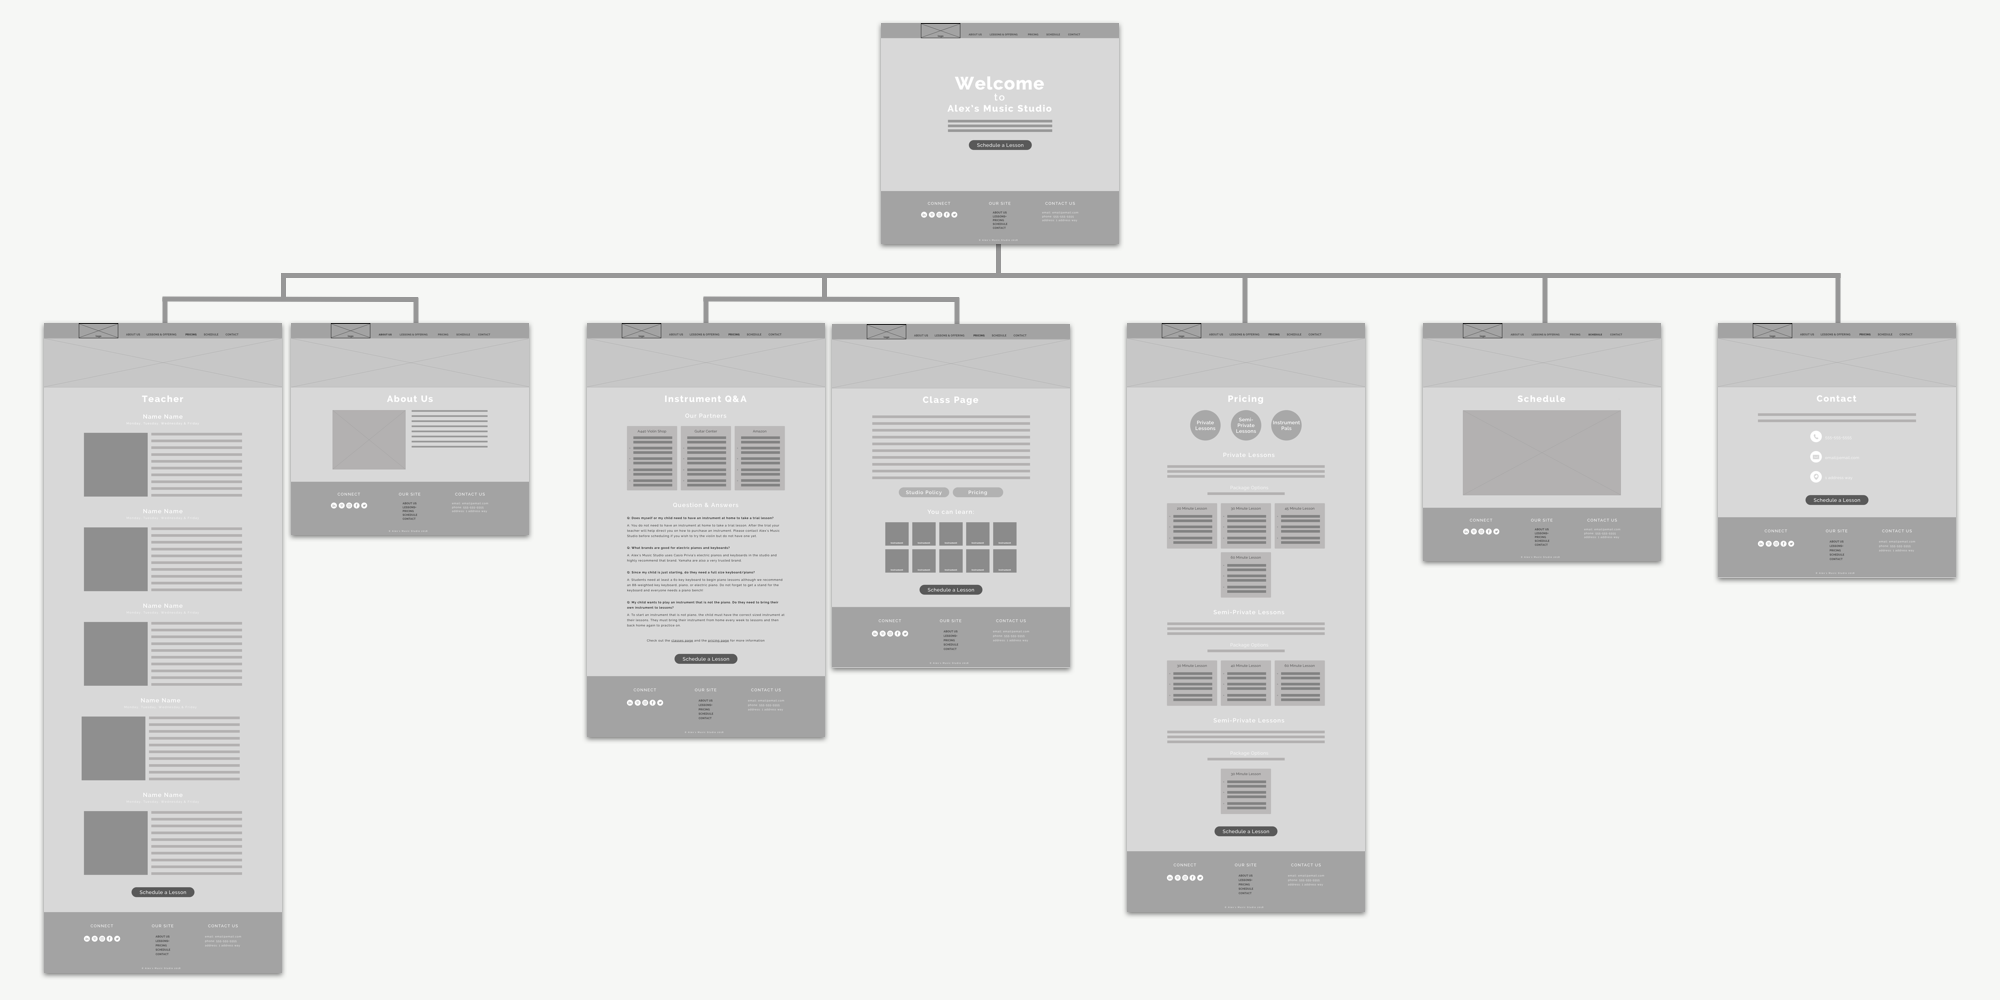 wireframe and sitemap for Alex's music studio